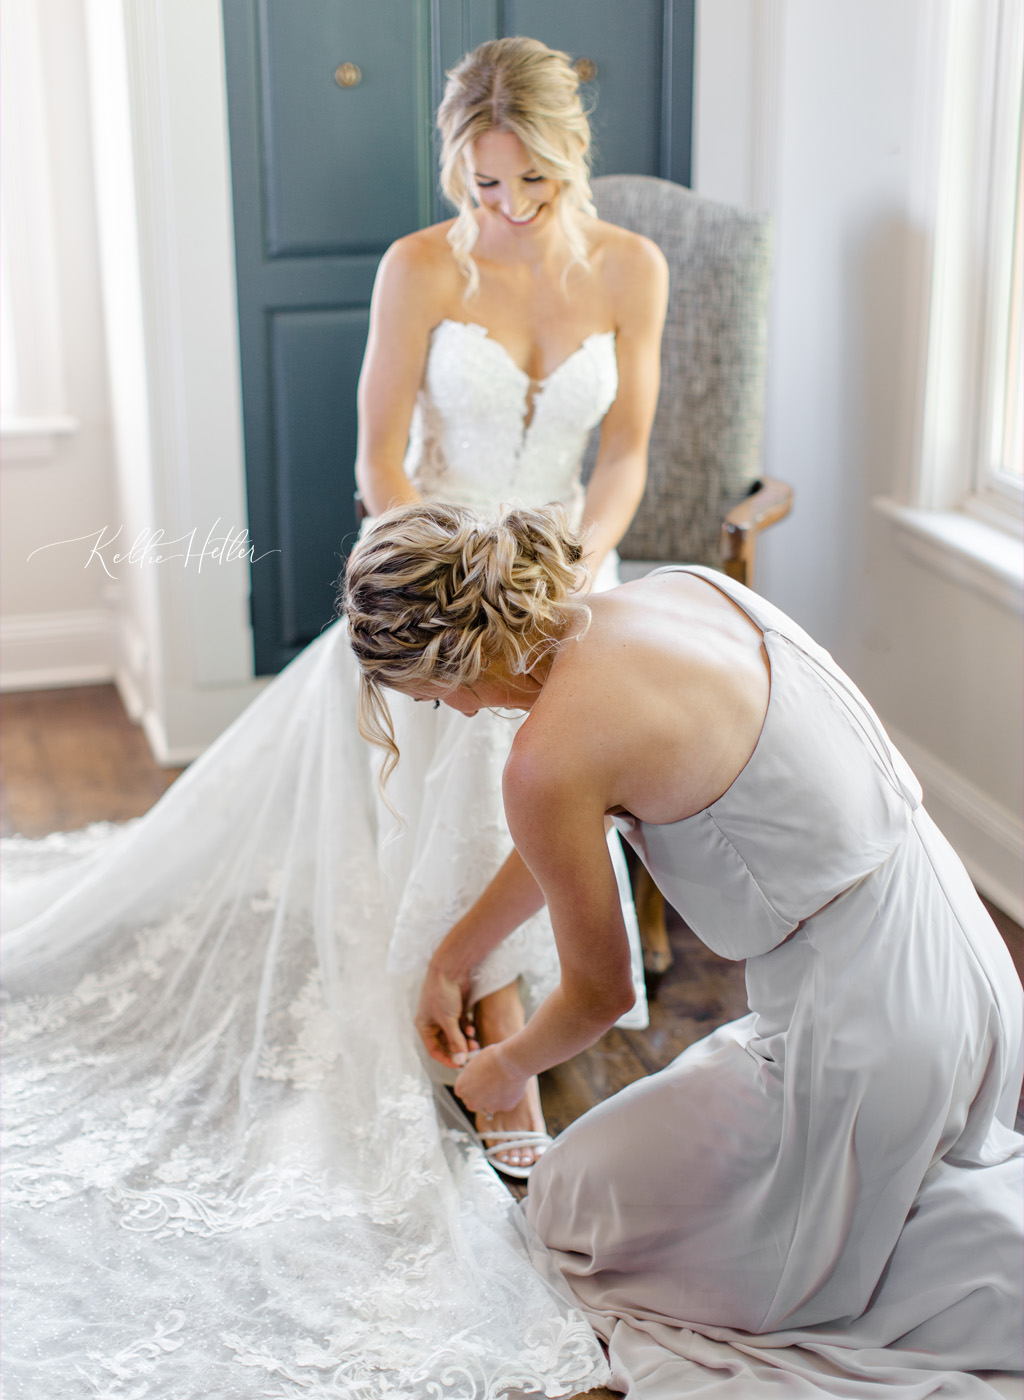 maid of honor putting on bride's shoe